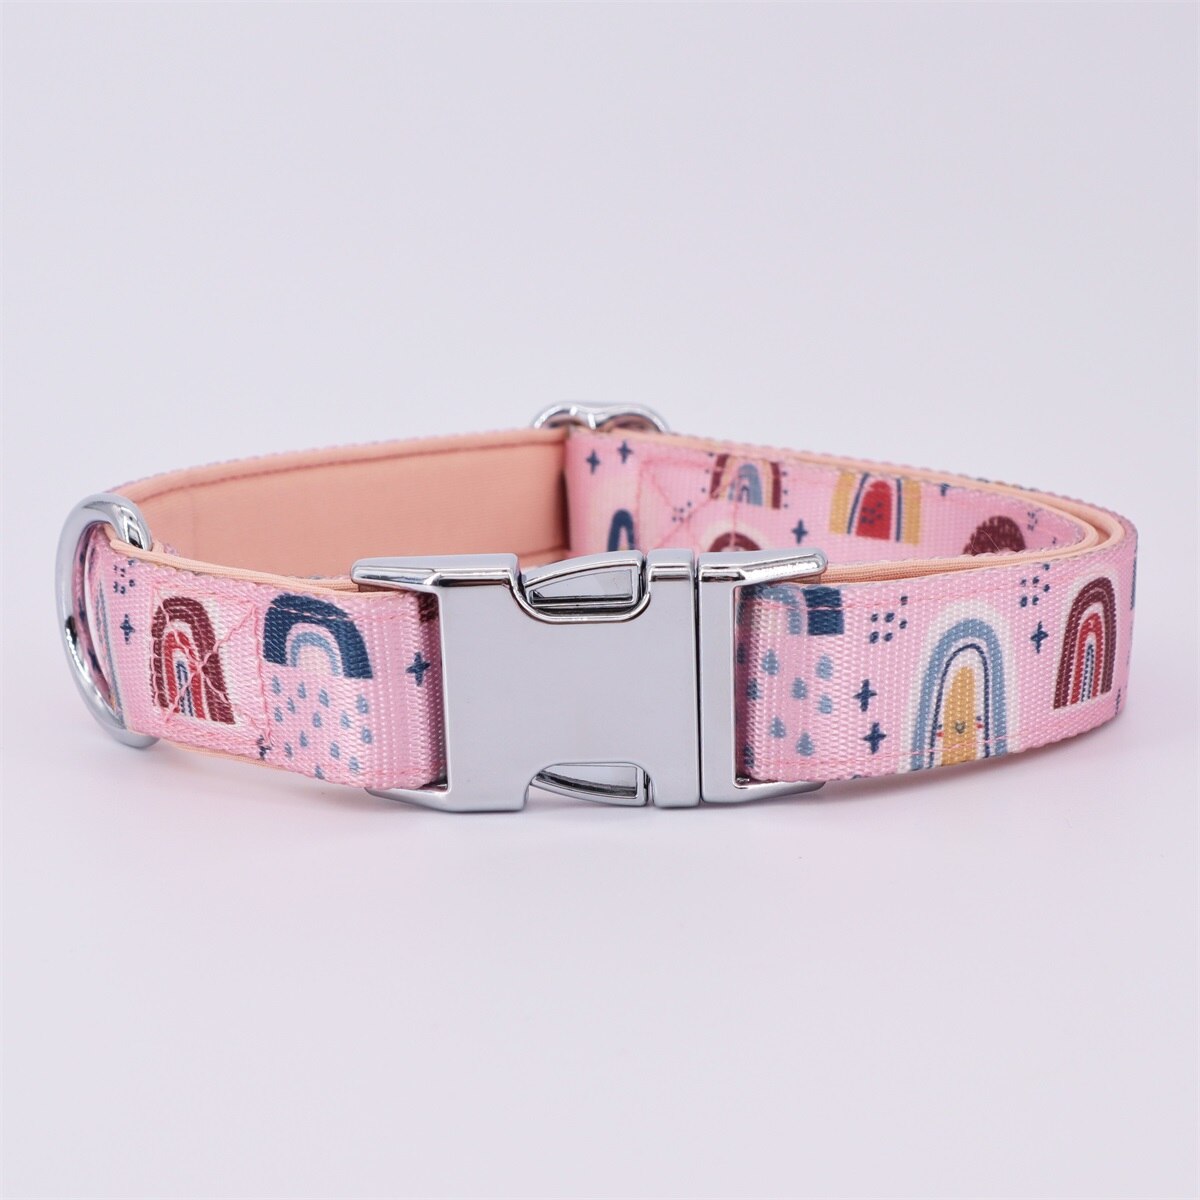 Trendy Rainbow Bow Collar: Personalized - CurliTail